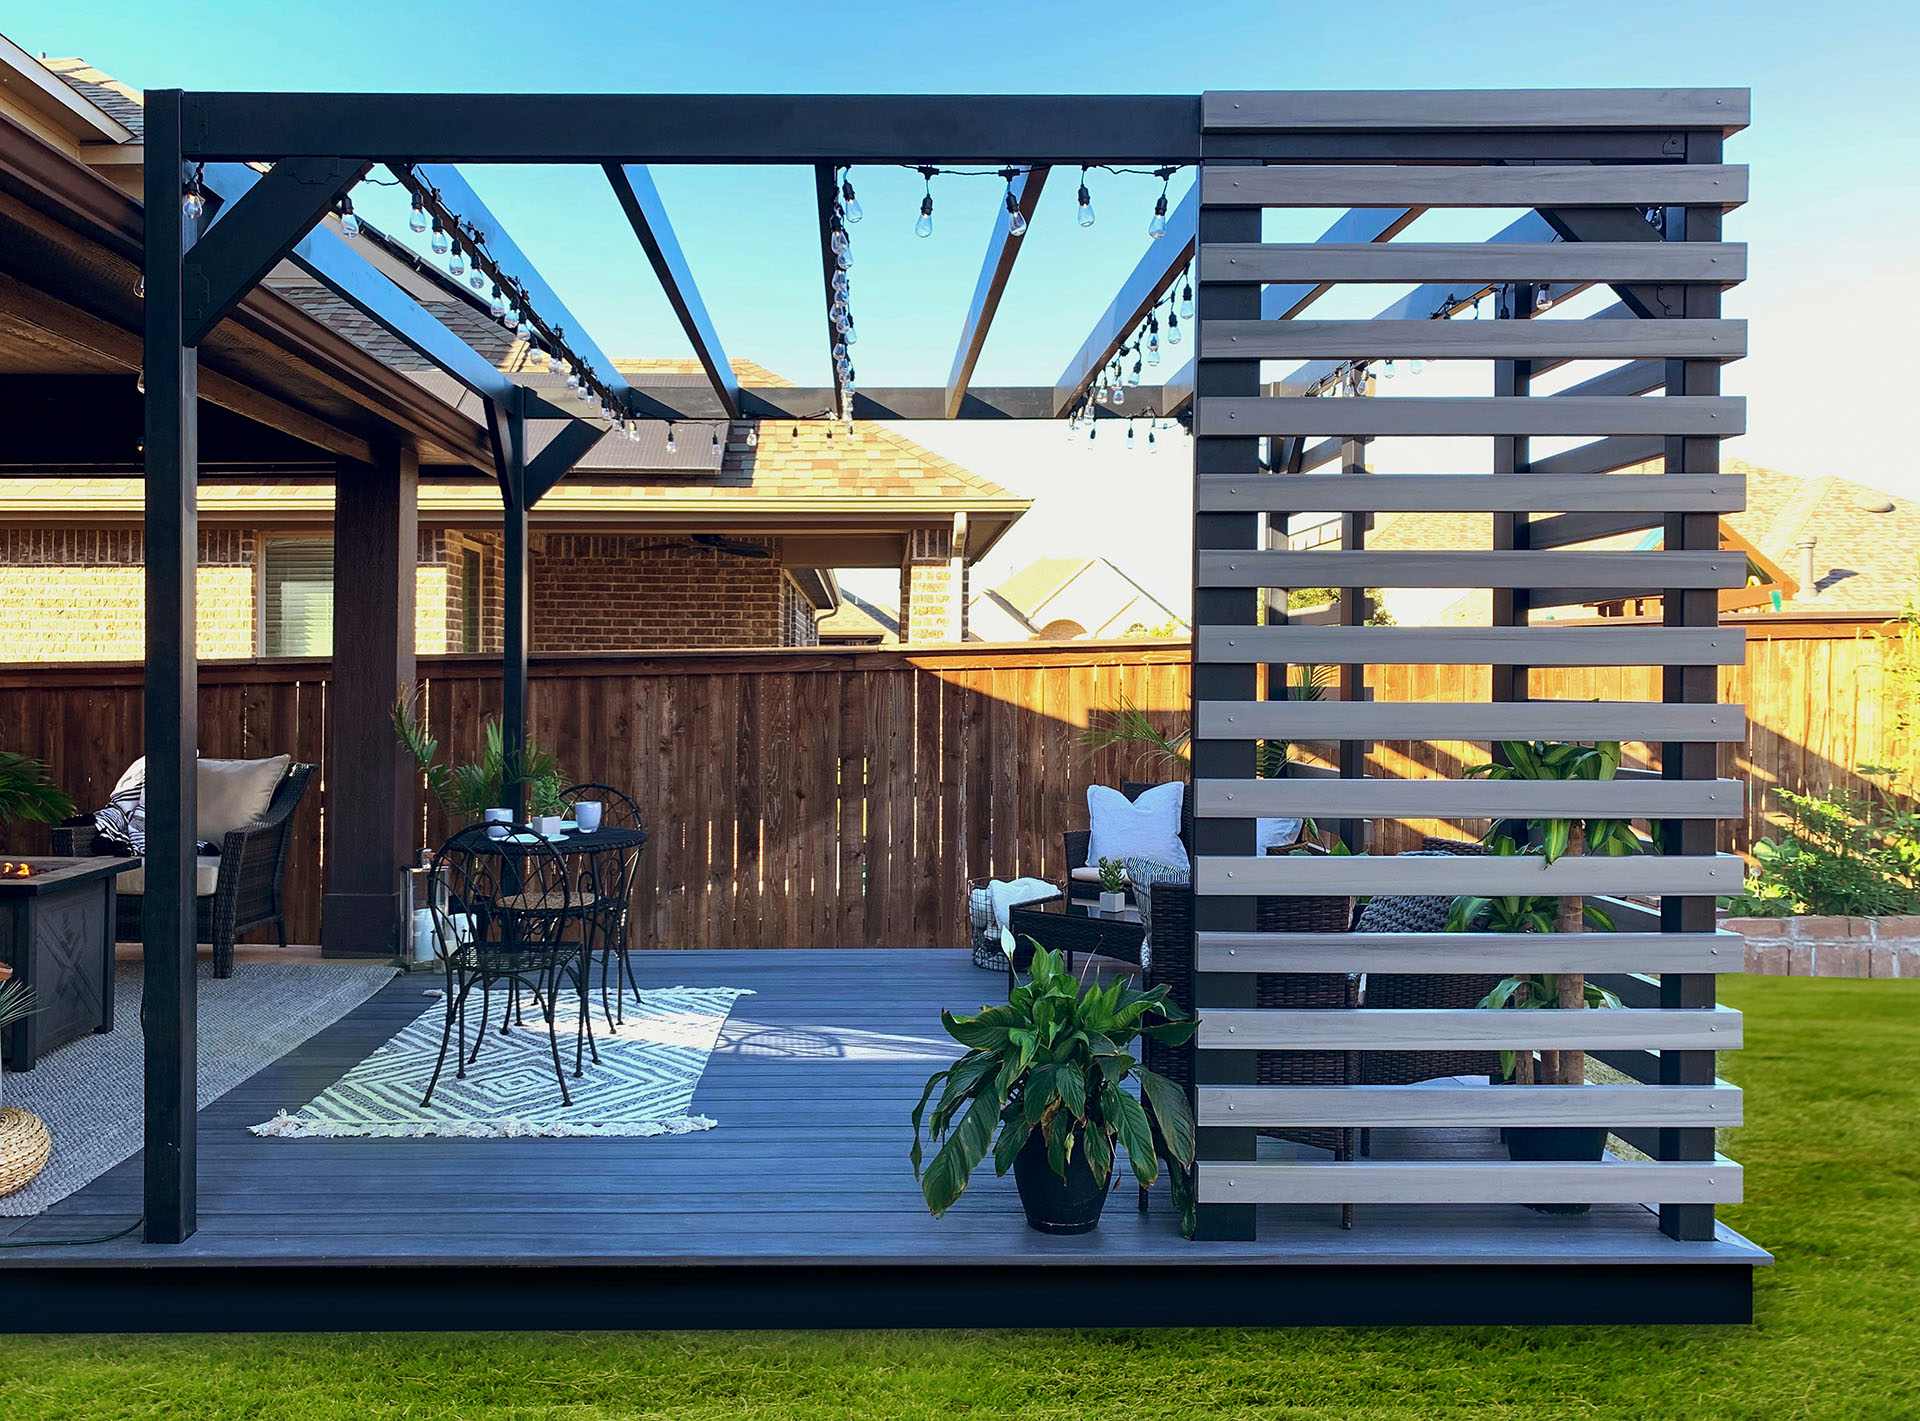 Steel pergola with privacy boards shelters ground level deck